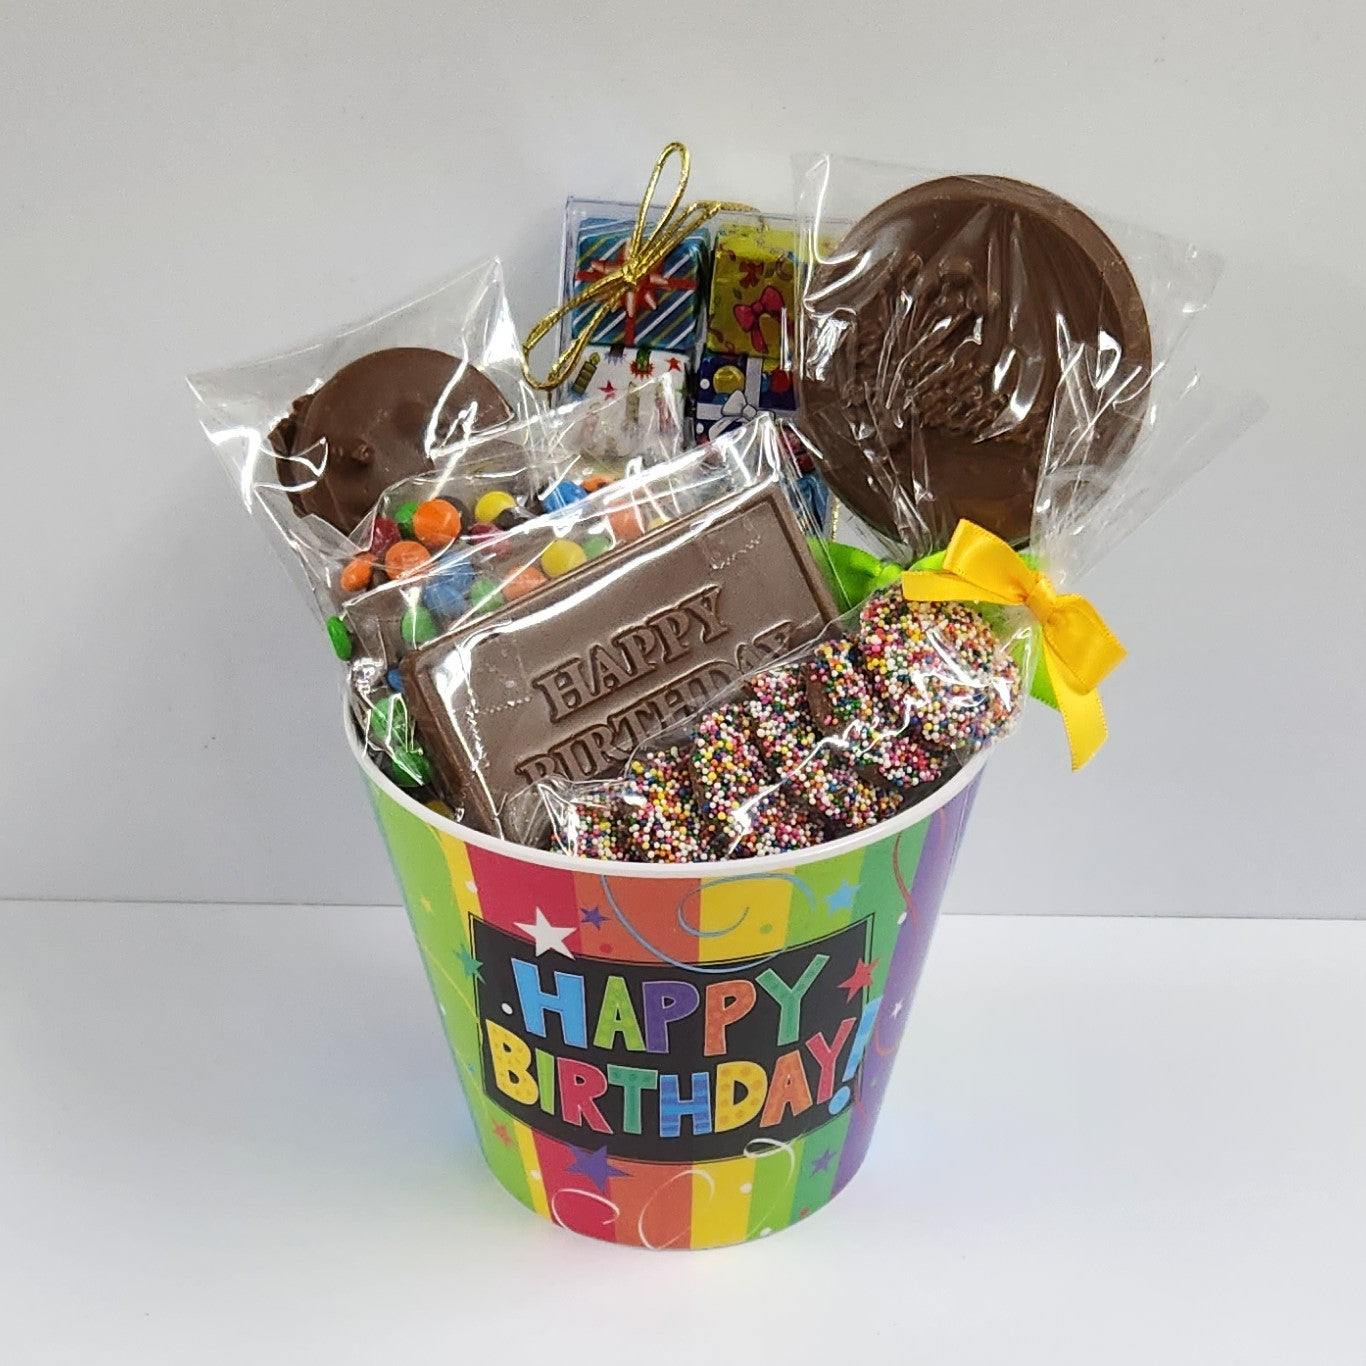 Happy Birthday Chocolate Gift Basket includes foiled milk chocolate presents, milk chocolate nonpareils, milk chocolate M & M Pretzel, milk chocolate oreos, a milk chocolate birthday lollipop and a milk chocolate "Happy Birthday!" card